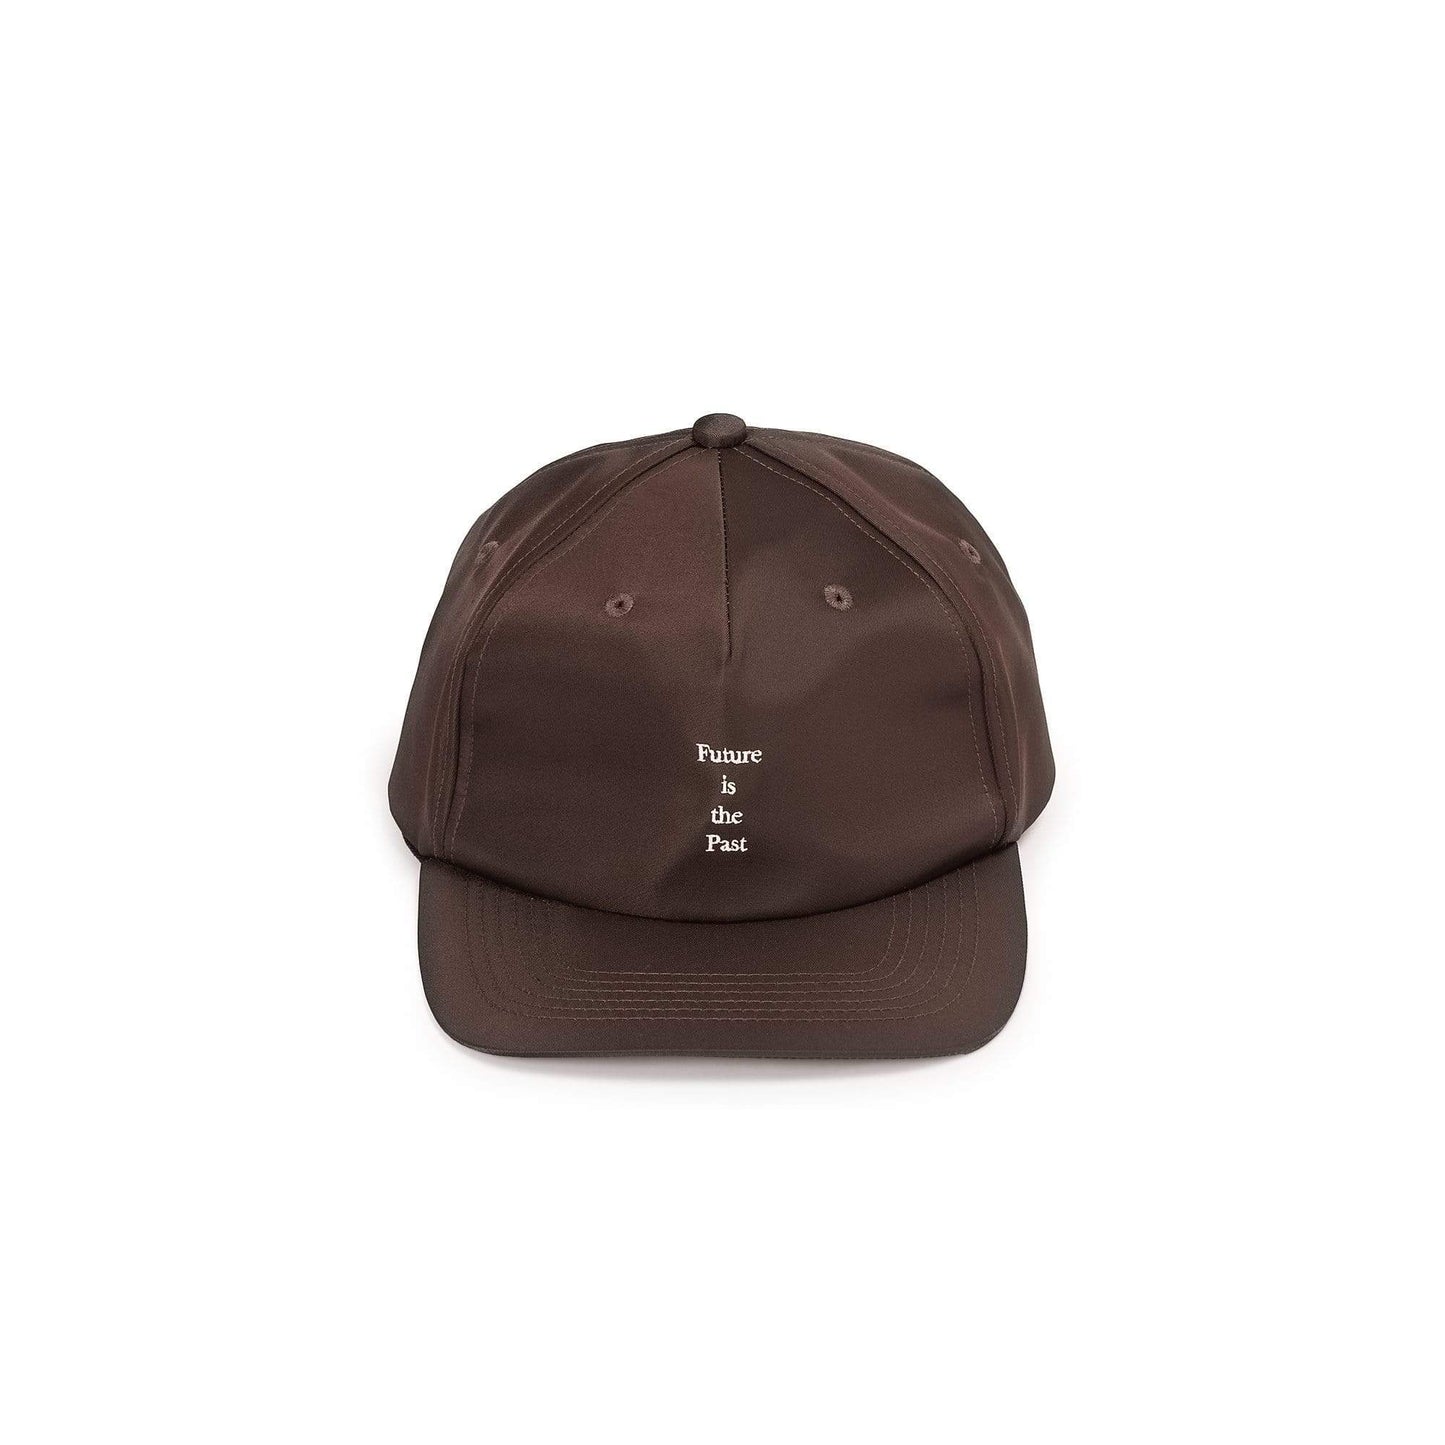 undercover future is the past cap (dark brown) - ucy4h03-dbrown - a.plus - Image - 1